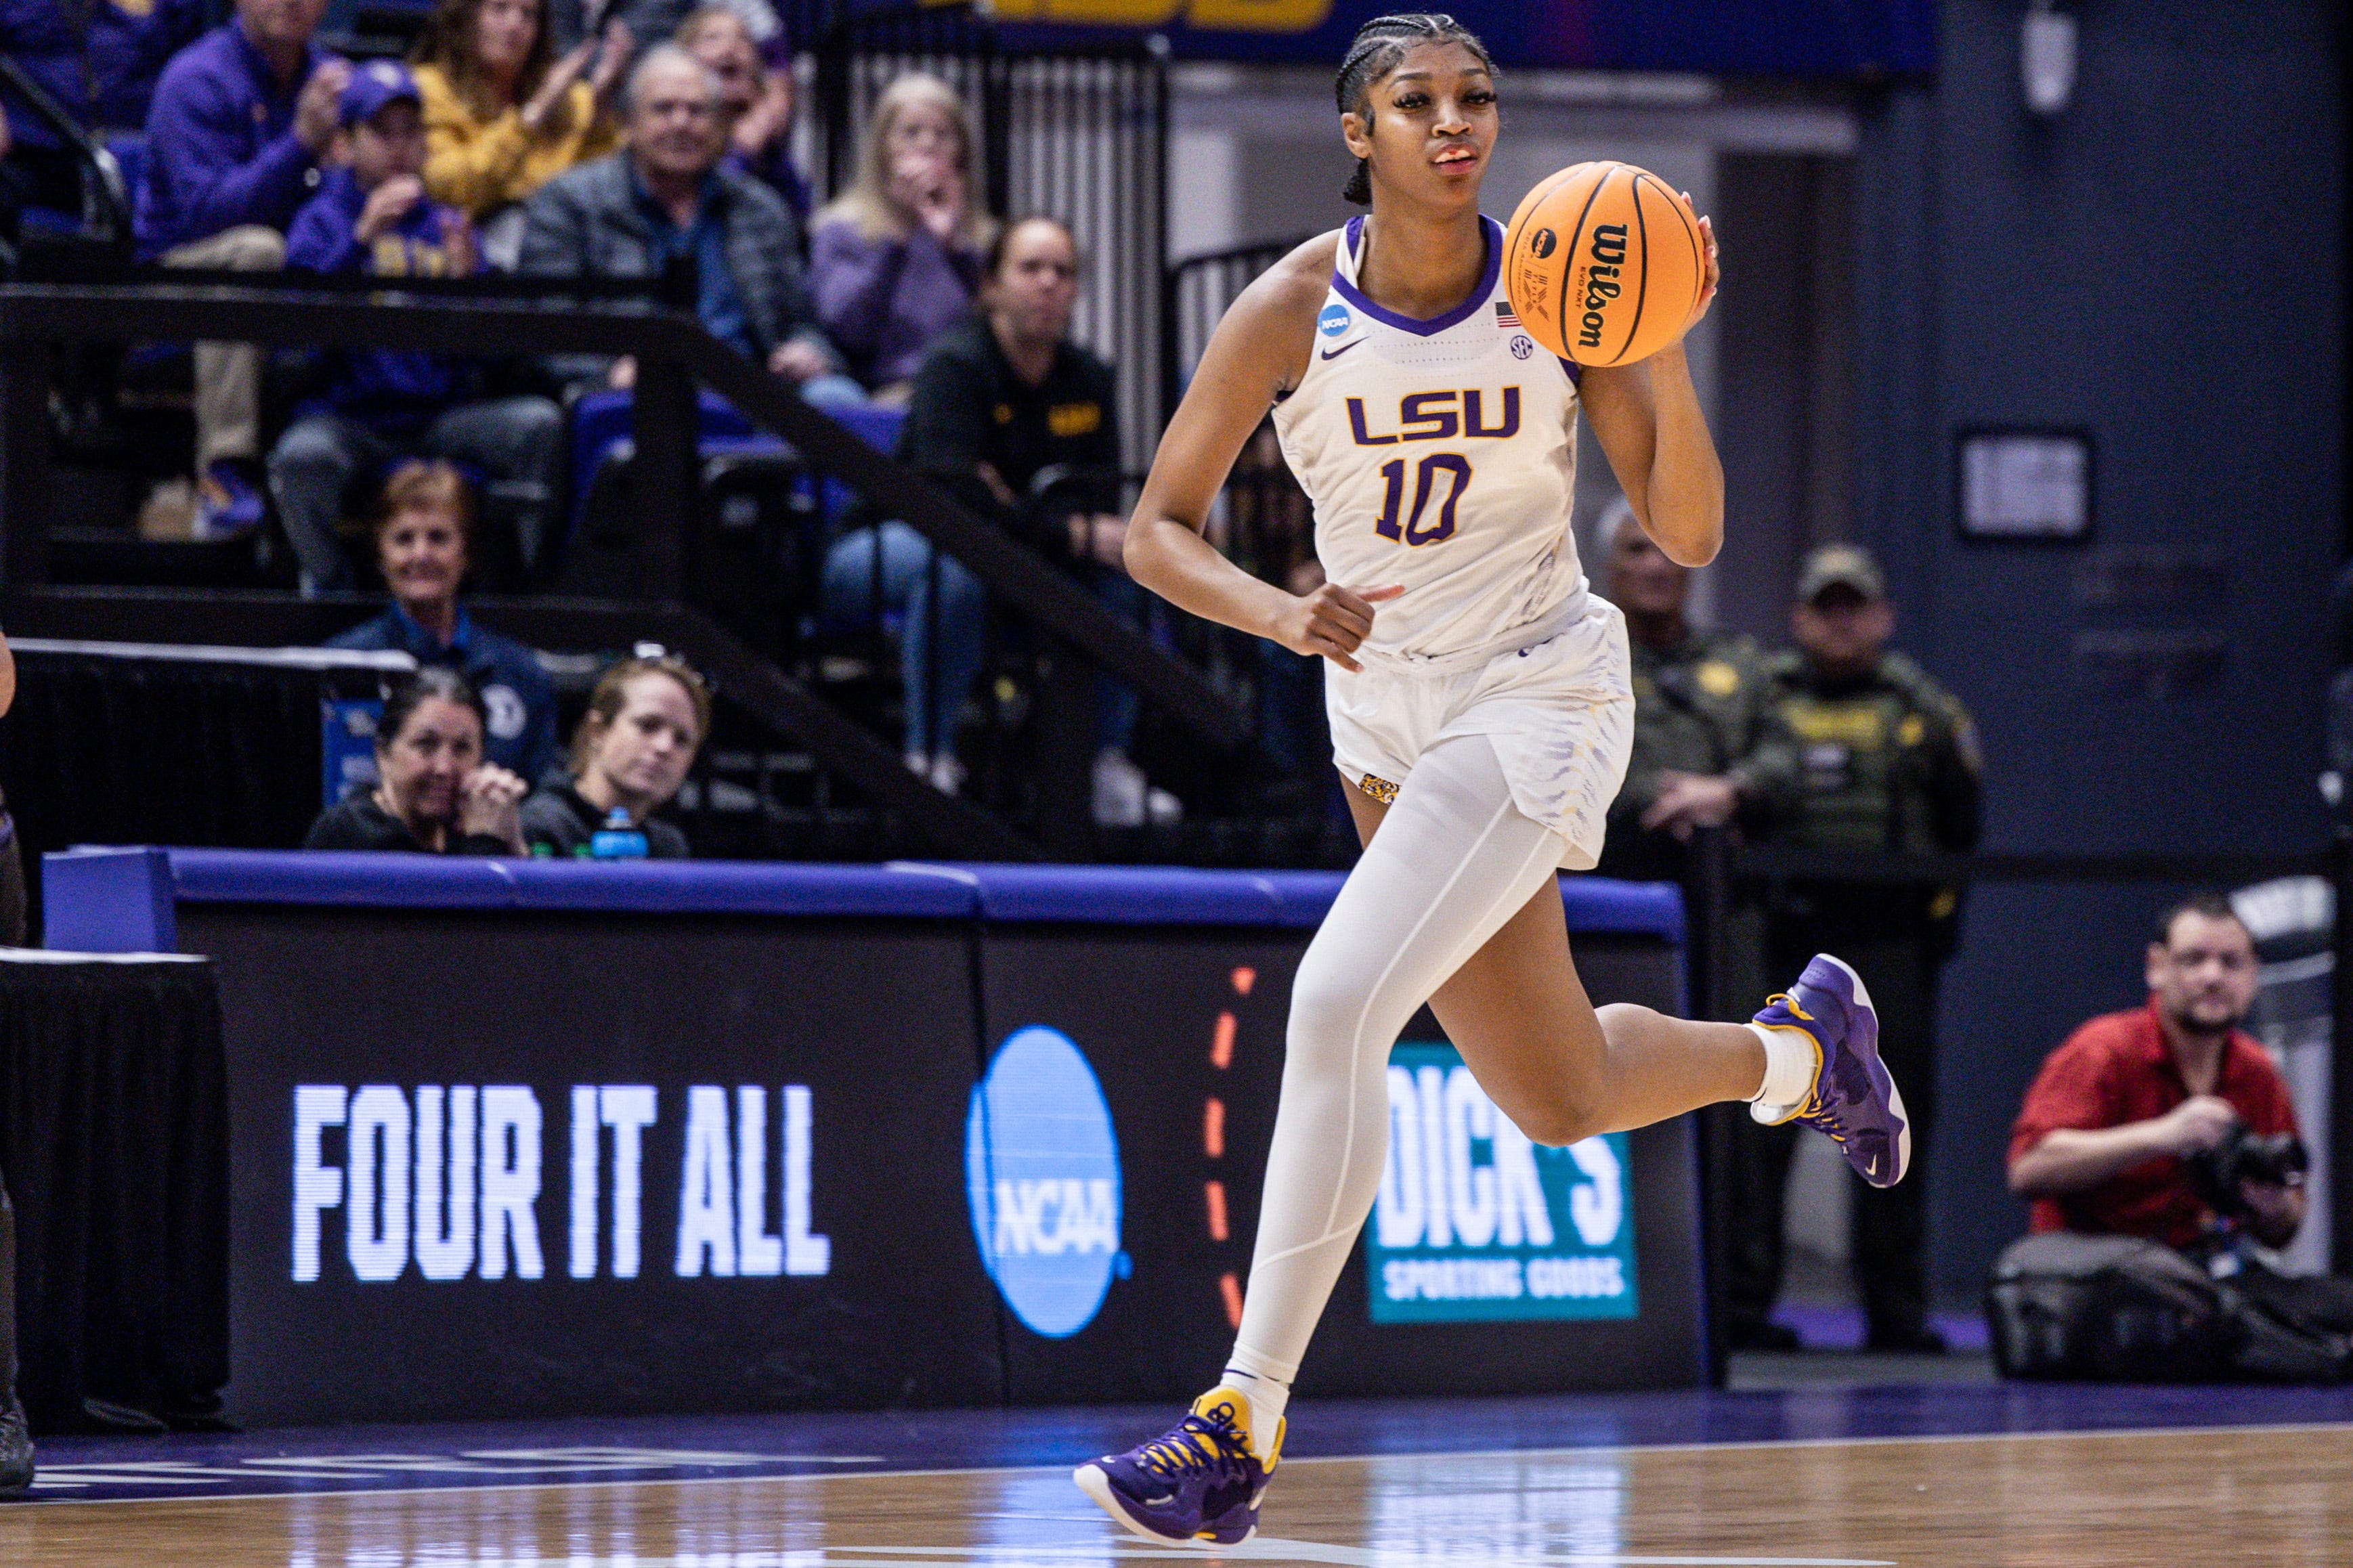 Mar 19, 2023; Baton Rouge, LA, USA; LSU Lady Tigers forward Angel Reese (10) brings the ball up court against the Michigan Wolverines during the first half at Pete Maravich Assembly Center. Mandatory Credit: Stephen Lew-USA TODAY Sports